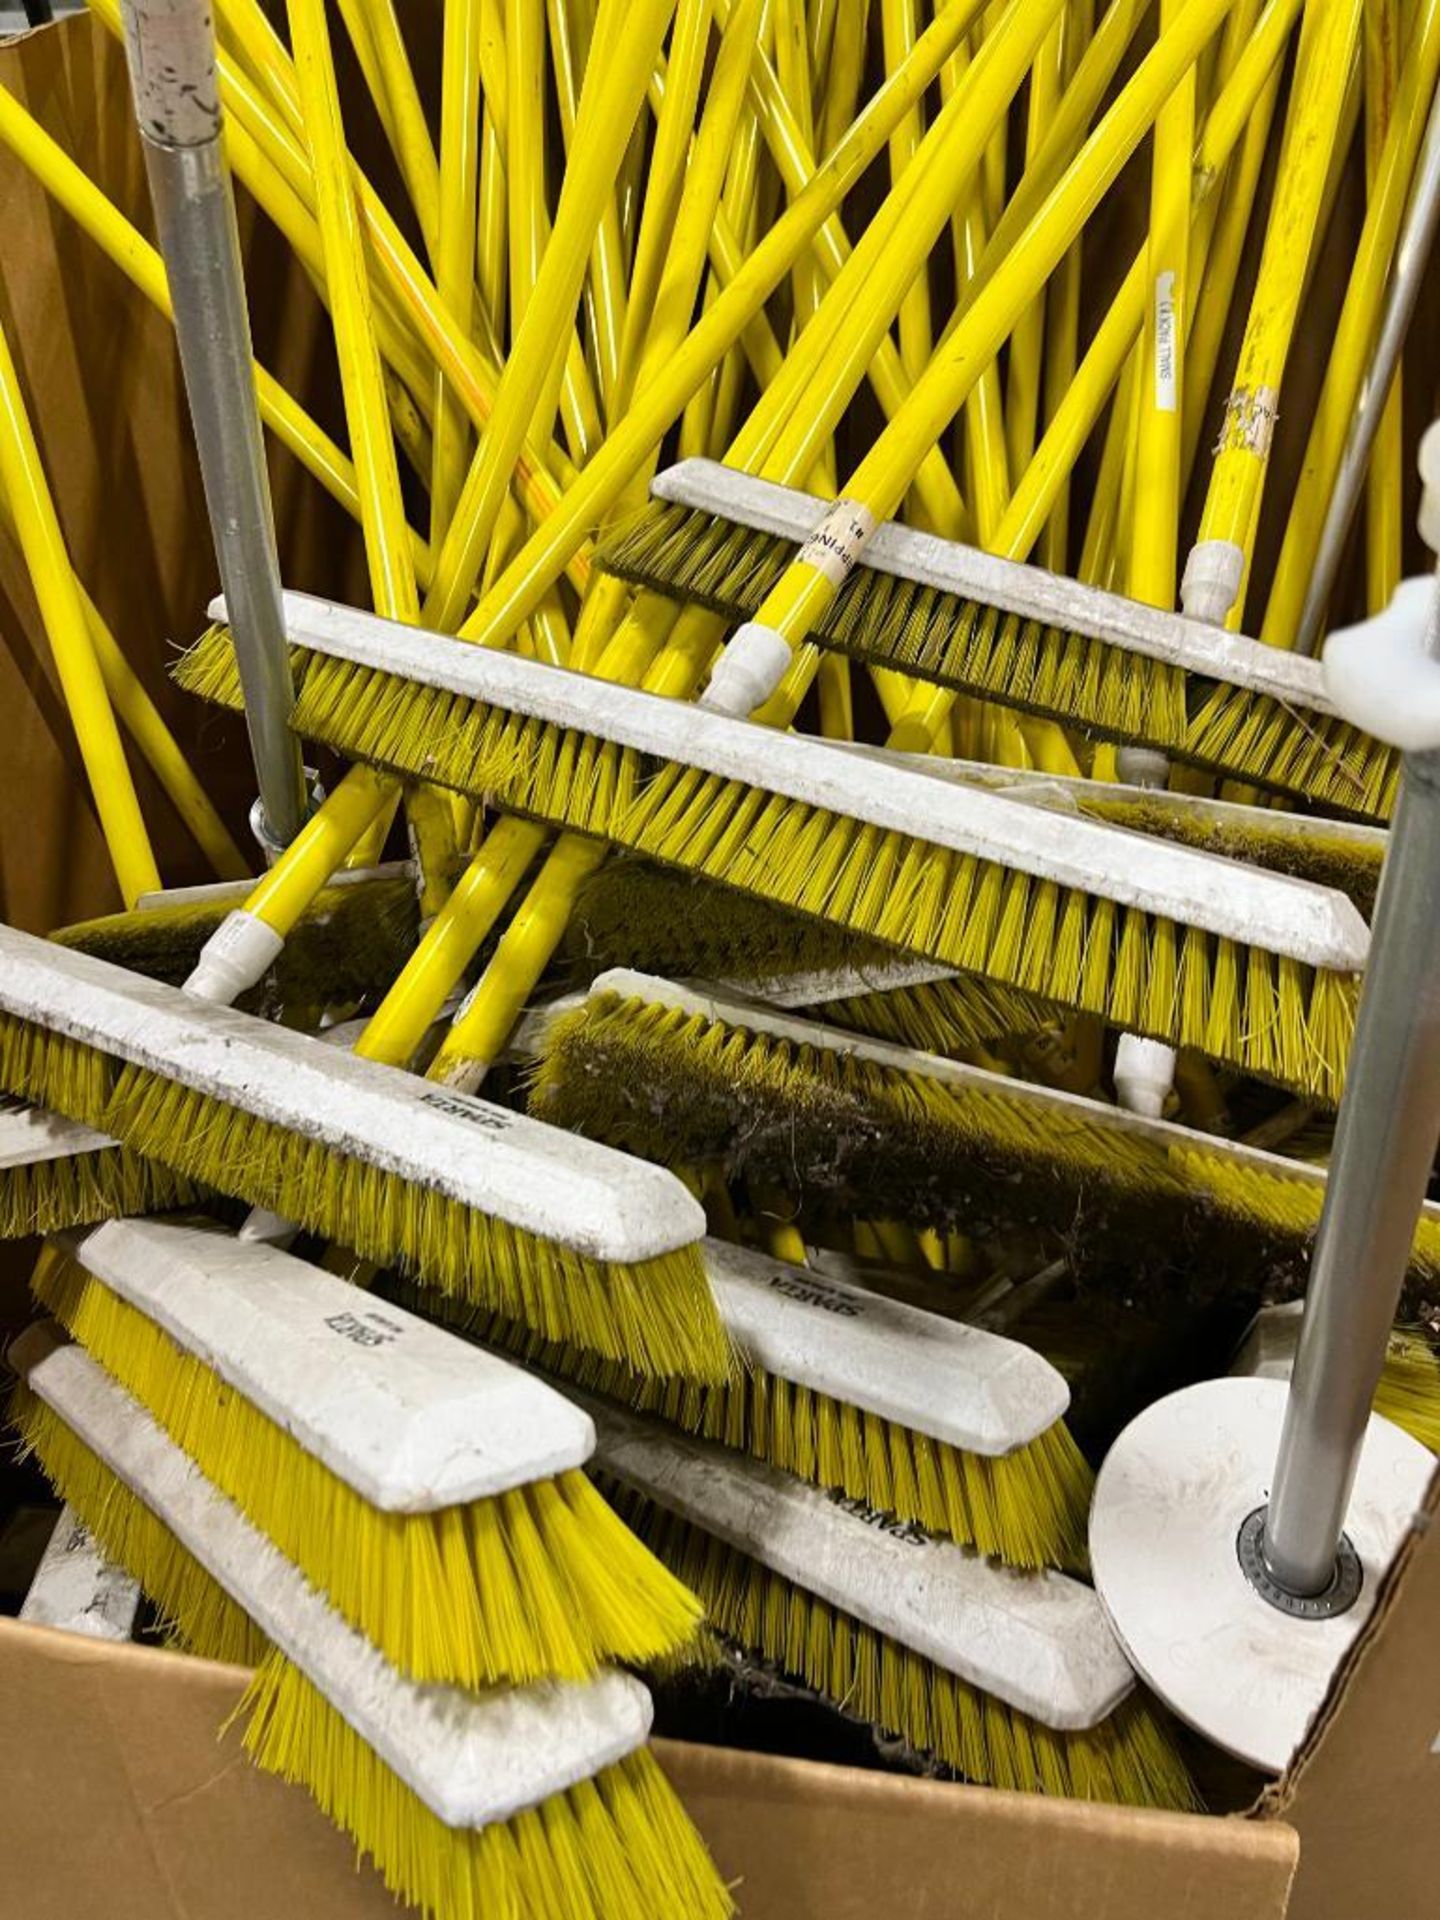 Box of Brooms ($20 Loading Fee Will Be Added To Invoice) - Image 2 of 2